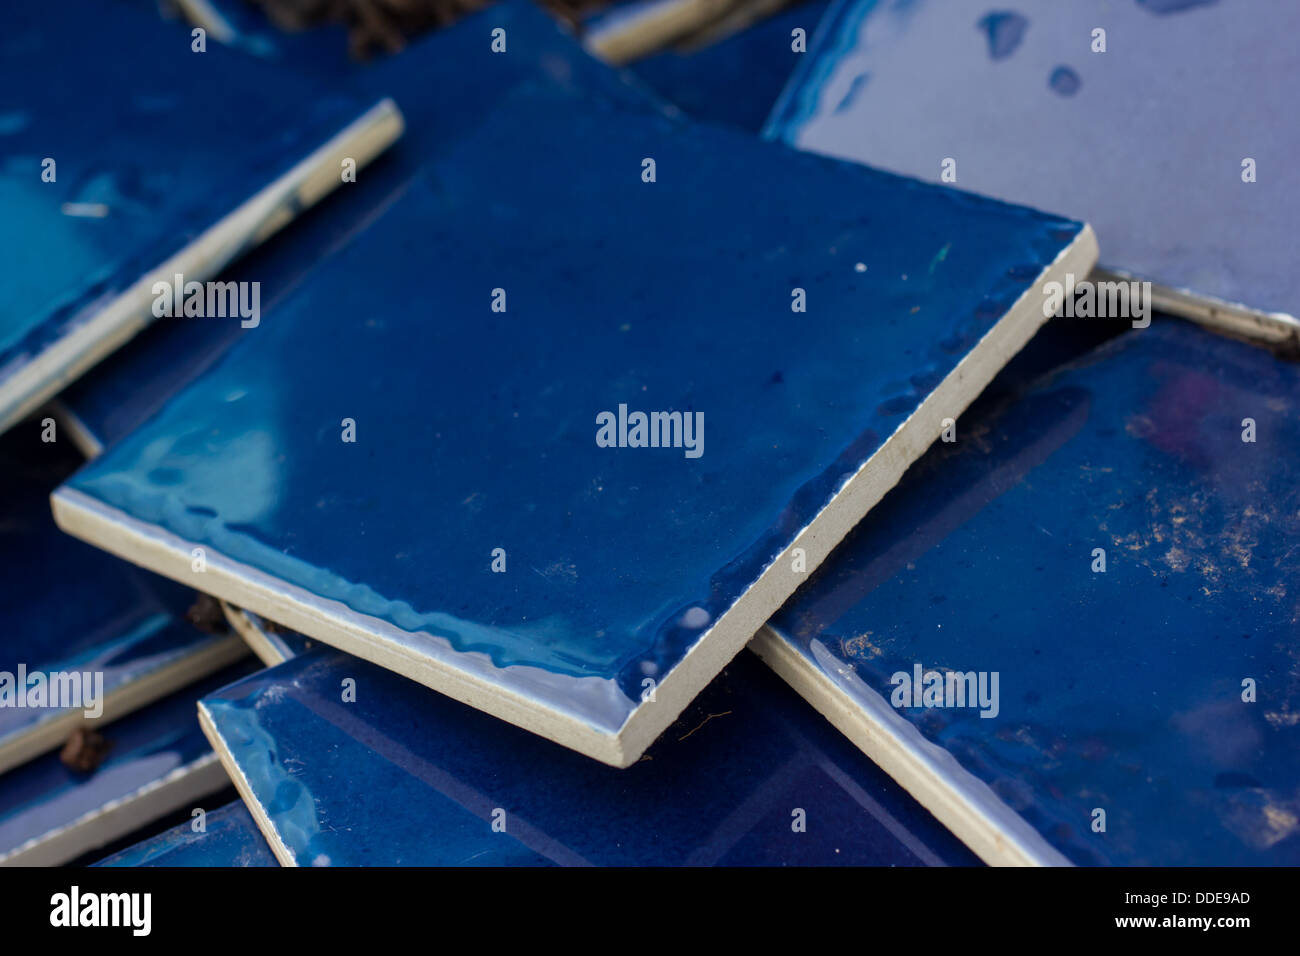 A full frame image of blue tiles that are arranged in a random pile Stock Photo